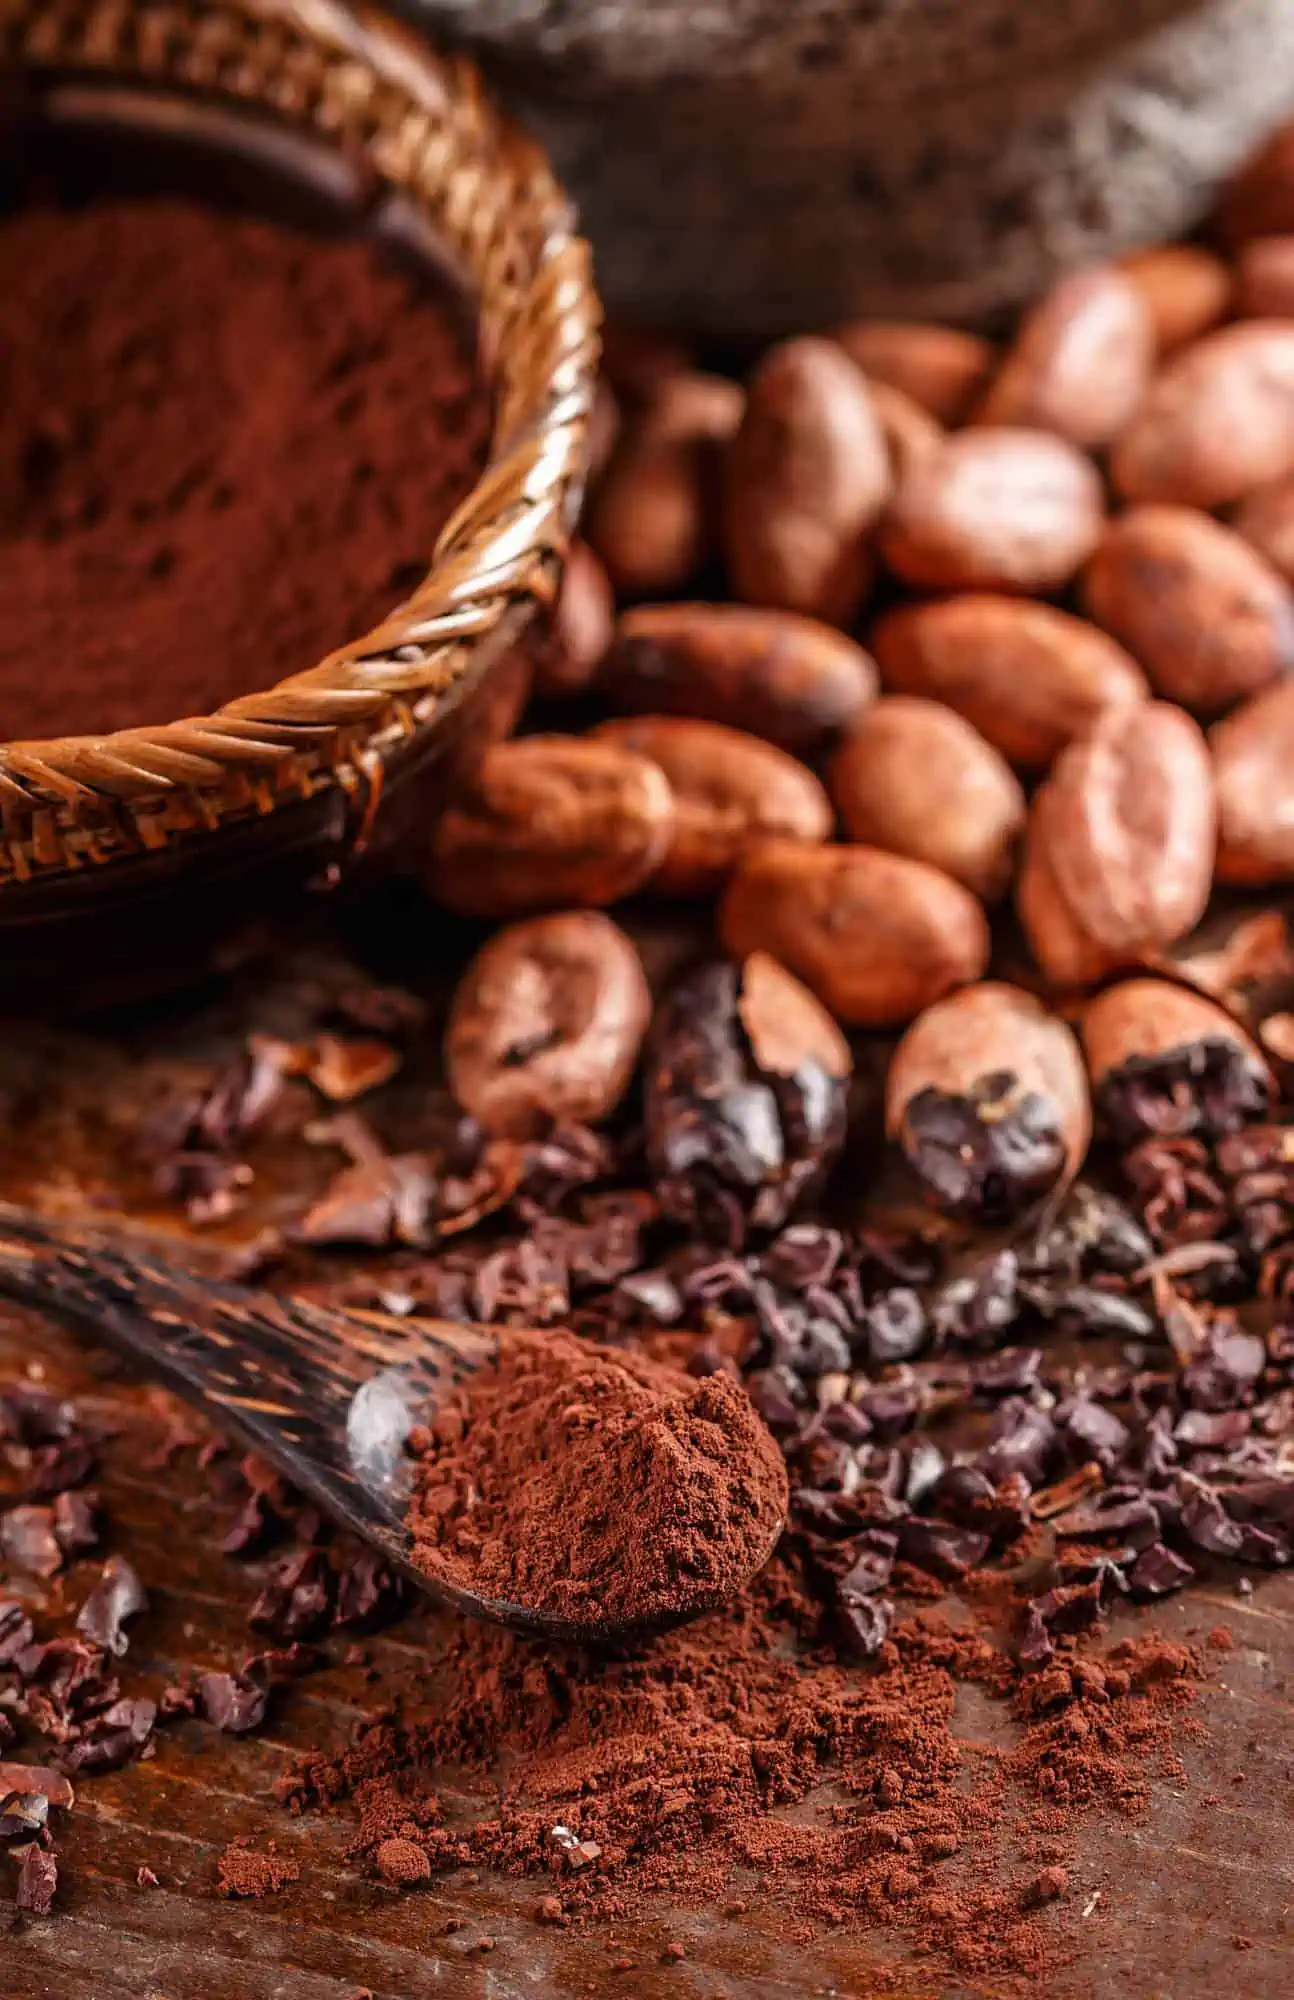 Types of raw chocolate and cocoa powder from cacao beans.